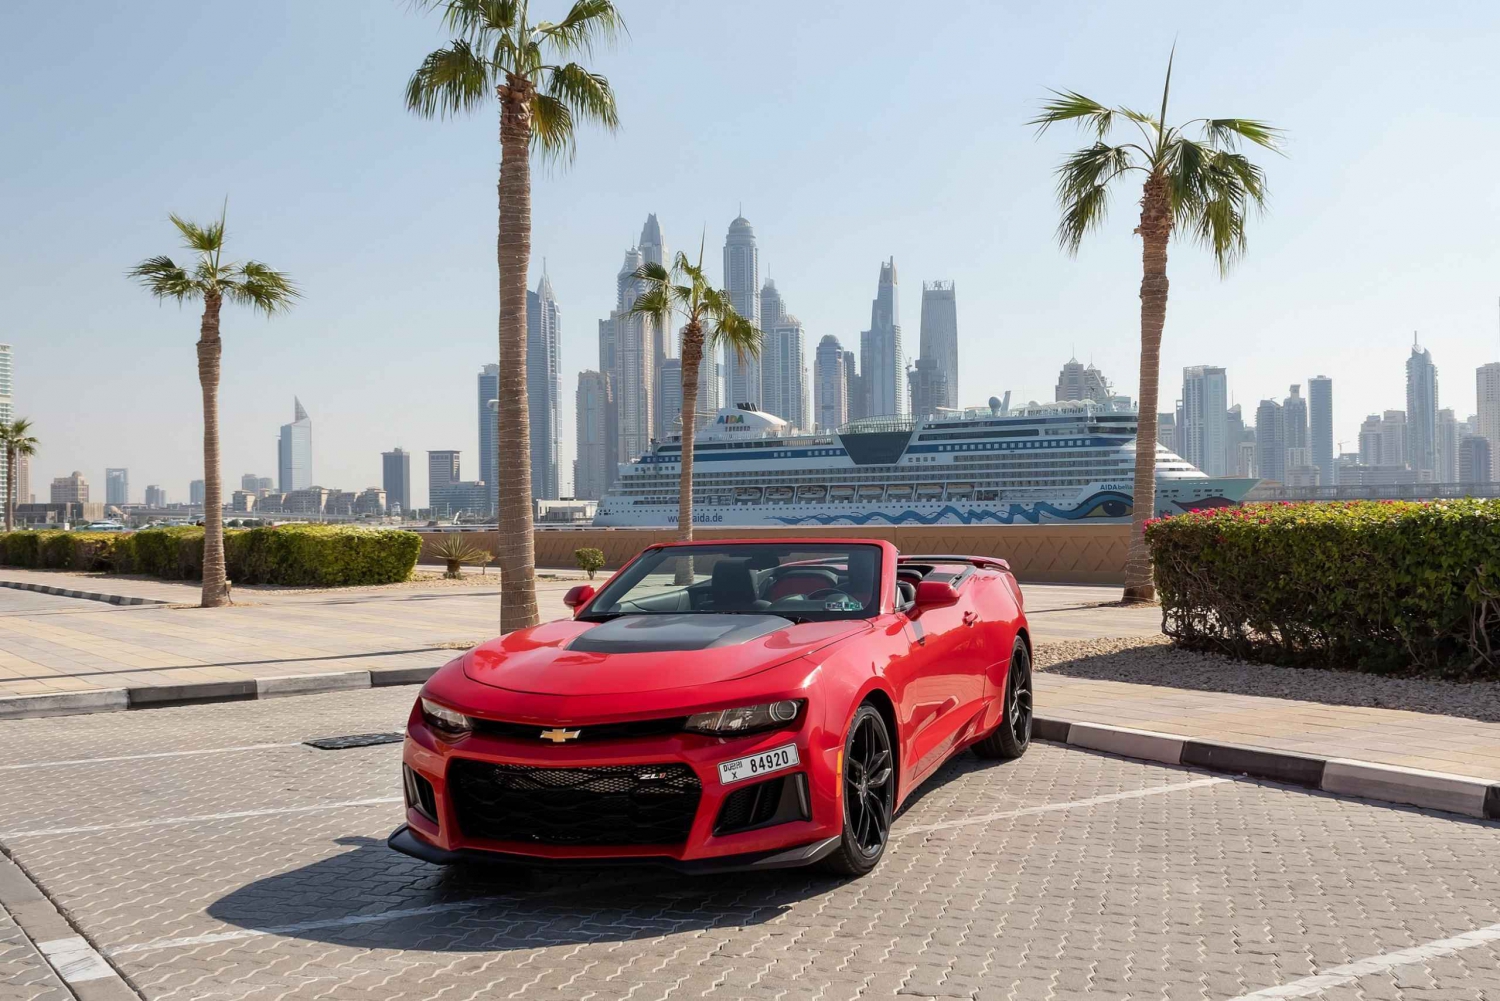 Dubai: Private City Sights Tour in a Cabriolet Convertible